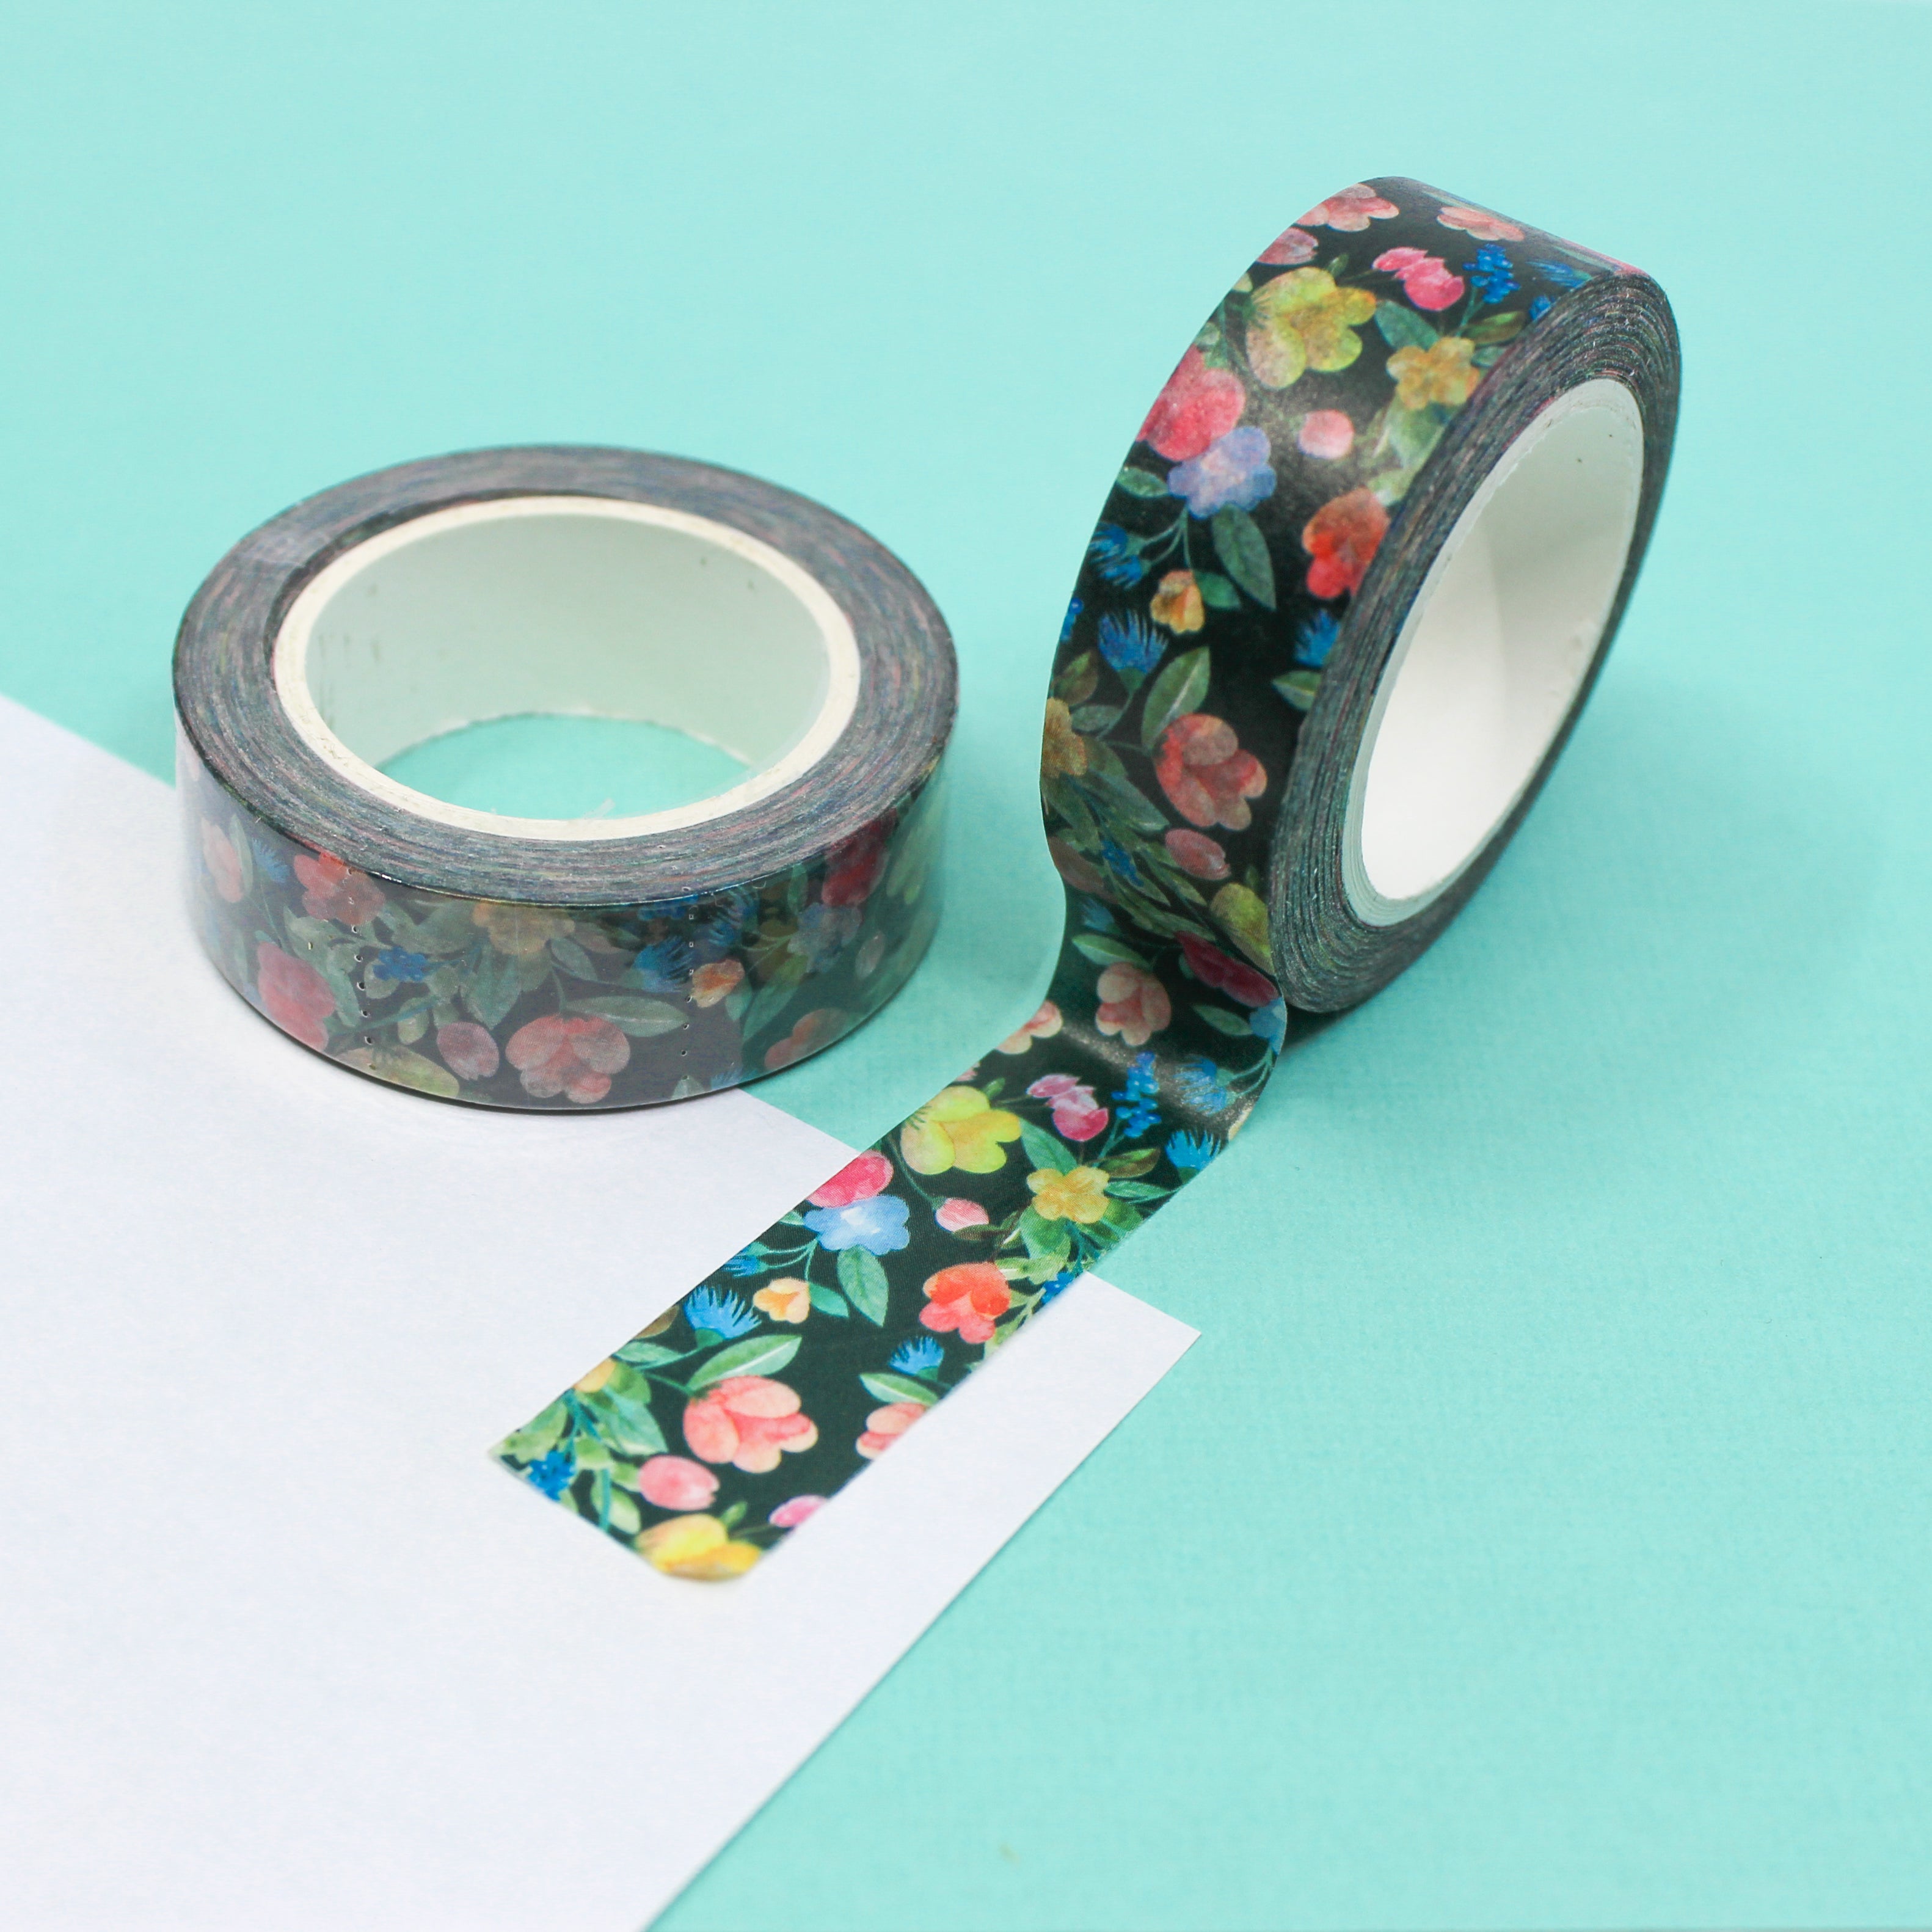 Enhance your crafts with our Bright Floral Black Background Washi Tape, adorned with vivid and striking floral patterns on a bold black background. Ideal for adding a dramatic and vibrant touch to your projects. This tape is sold at BBB Supplies Craft Shop.